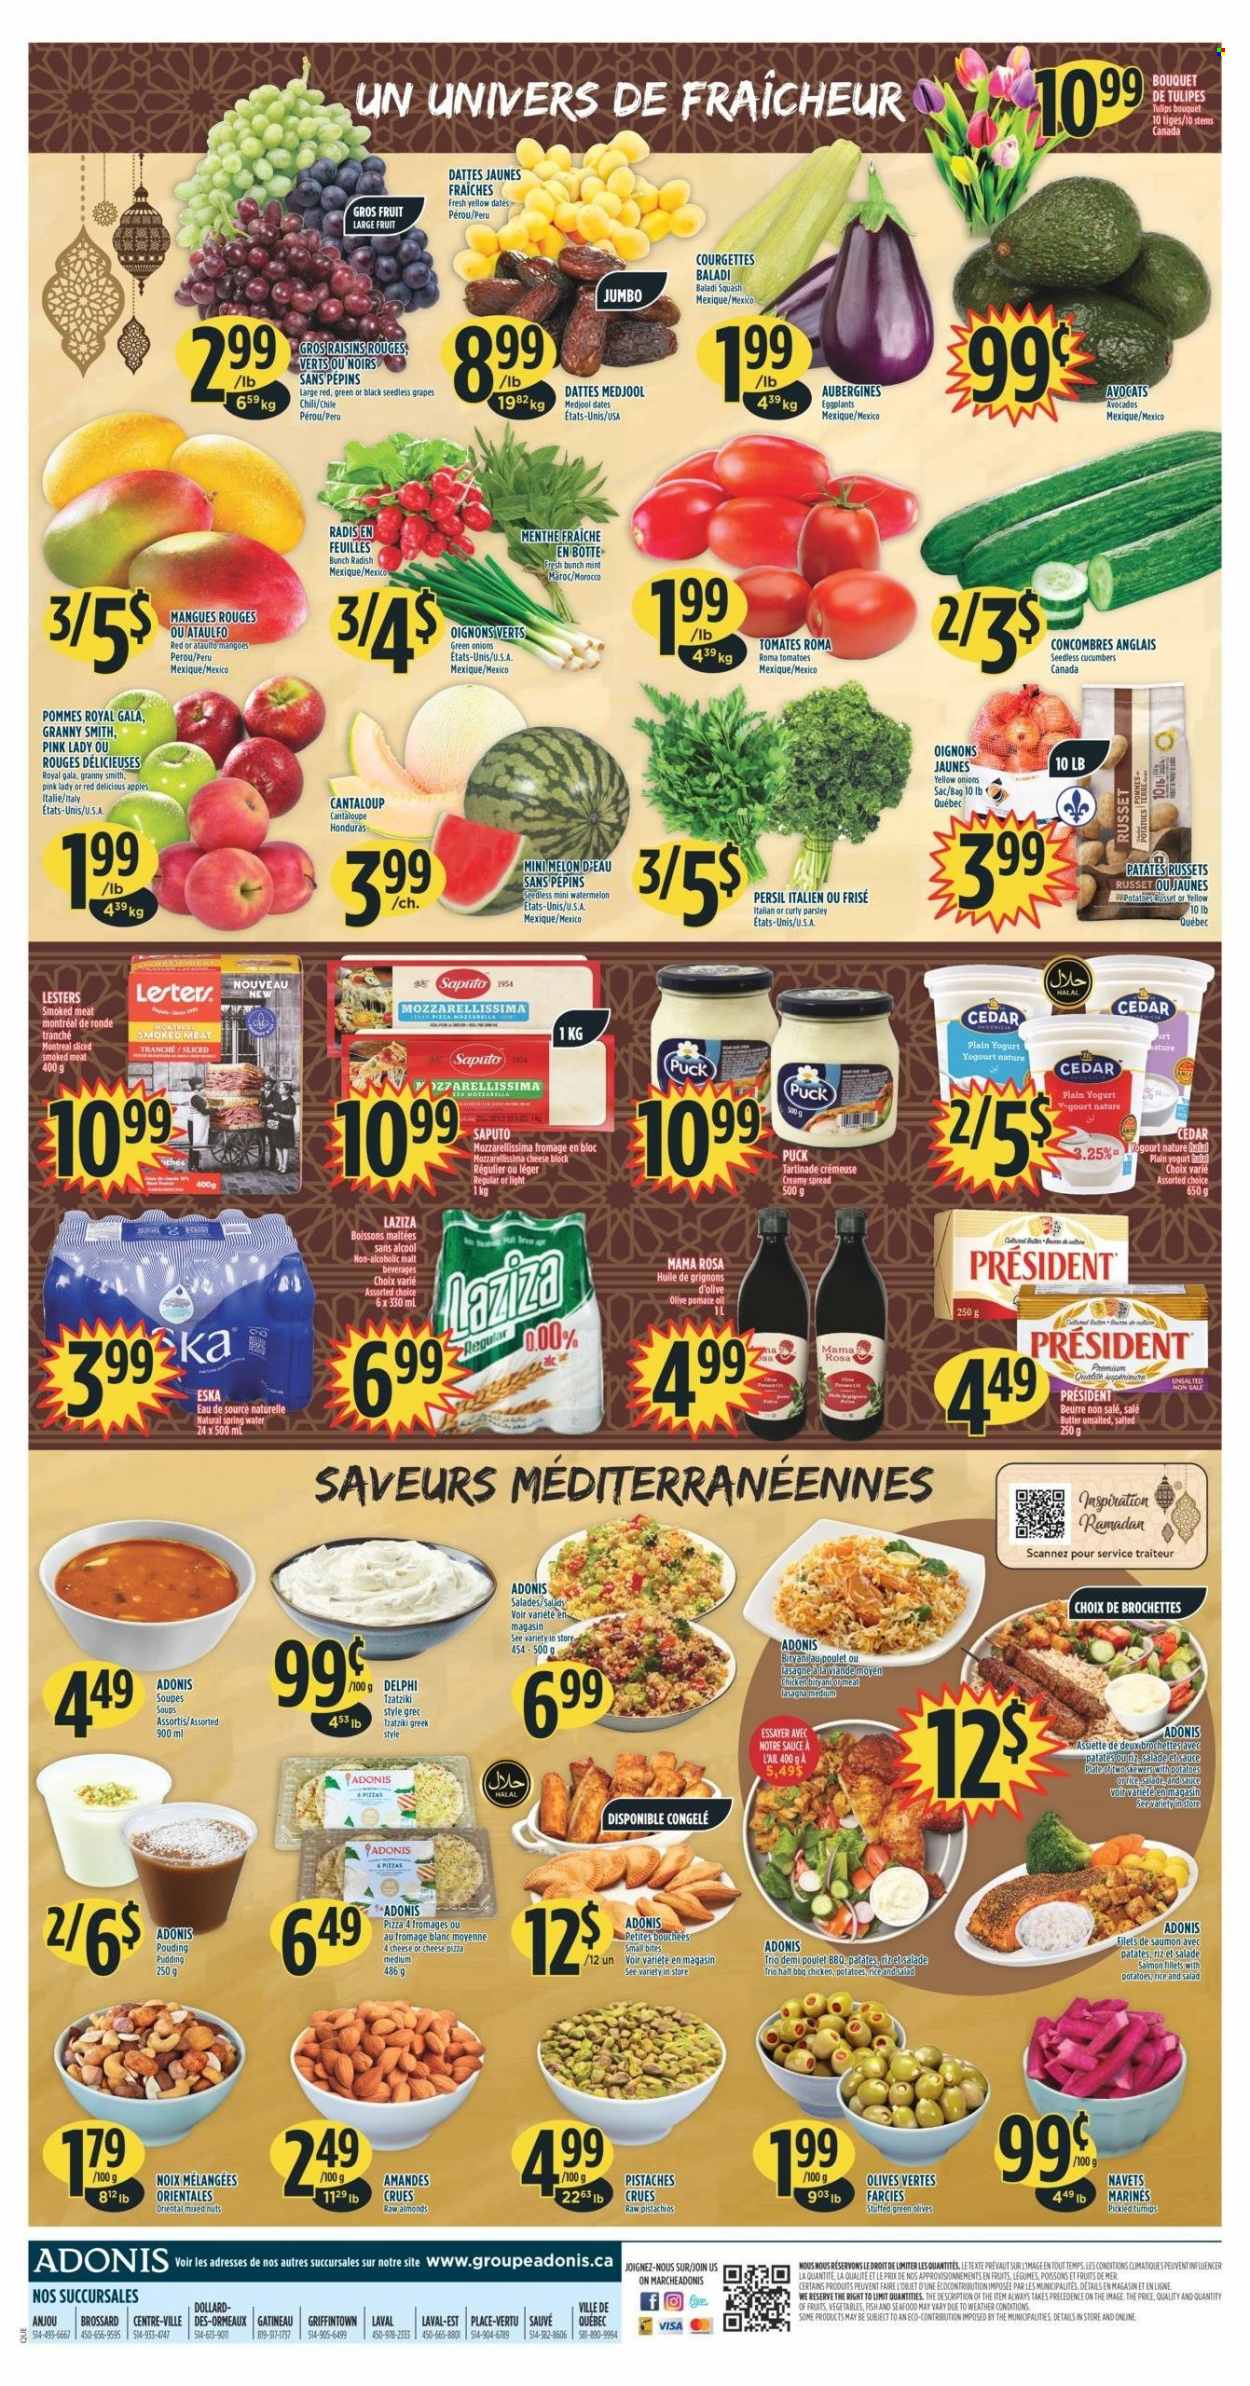 thumbnail - Adonis Flyer - March 16, 2023 - March 22, 2023 - Sales products - cantaloupe, cucumber, radishes, russet potatoes, parsley, eggplant, green onion, avocado, Gala, grapes, mango, Red Delicious apples, seedless grapes, watermelon, melons, Granny Smith, Pink Lady, salmon, salmon fillet, seafood, pizza, lasagna meal, tzatziki, Président, Puck, pudding, yoghurt, malt, almonds, dried fruit, pistachios, dried dates, mixed nuts, spring water, water, Persil, raisins, olives. Page 2.